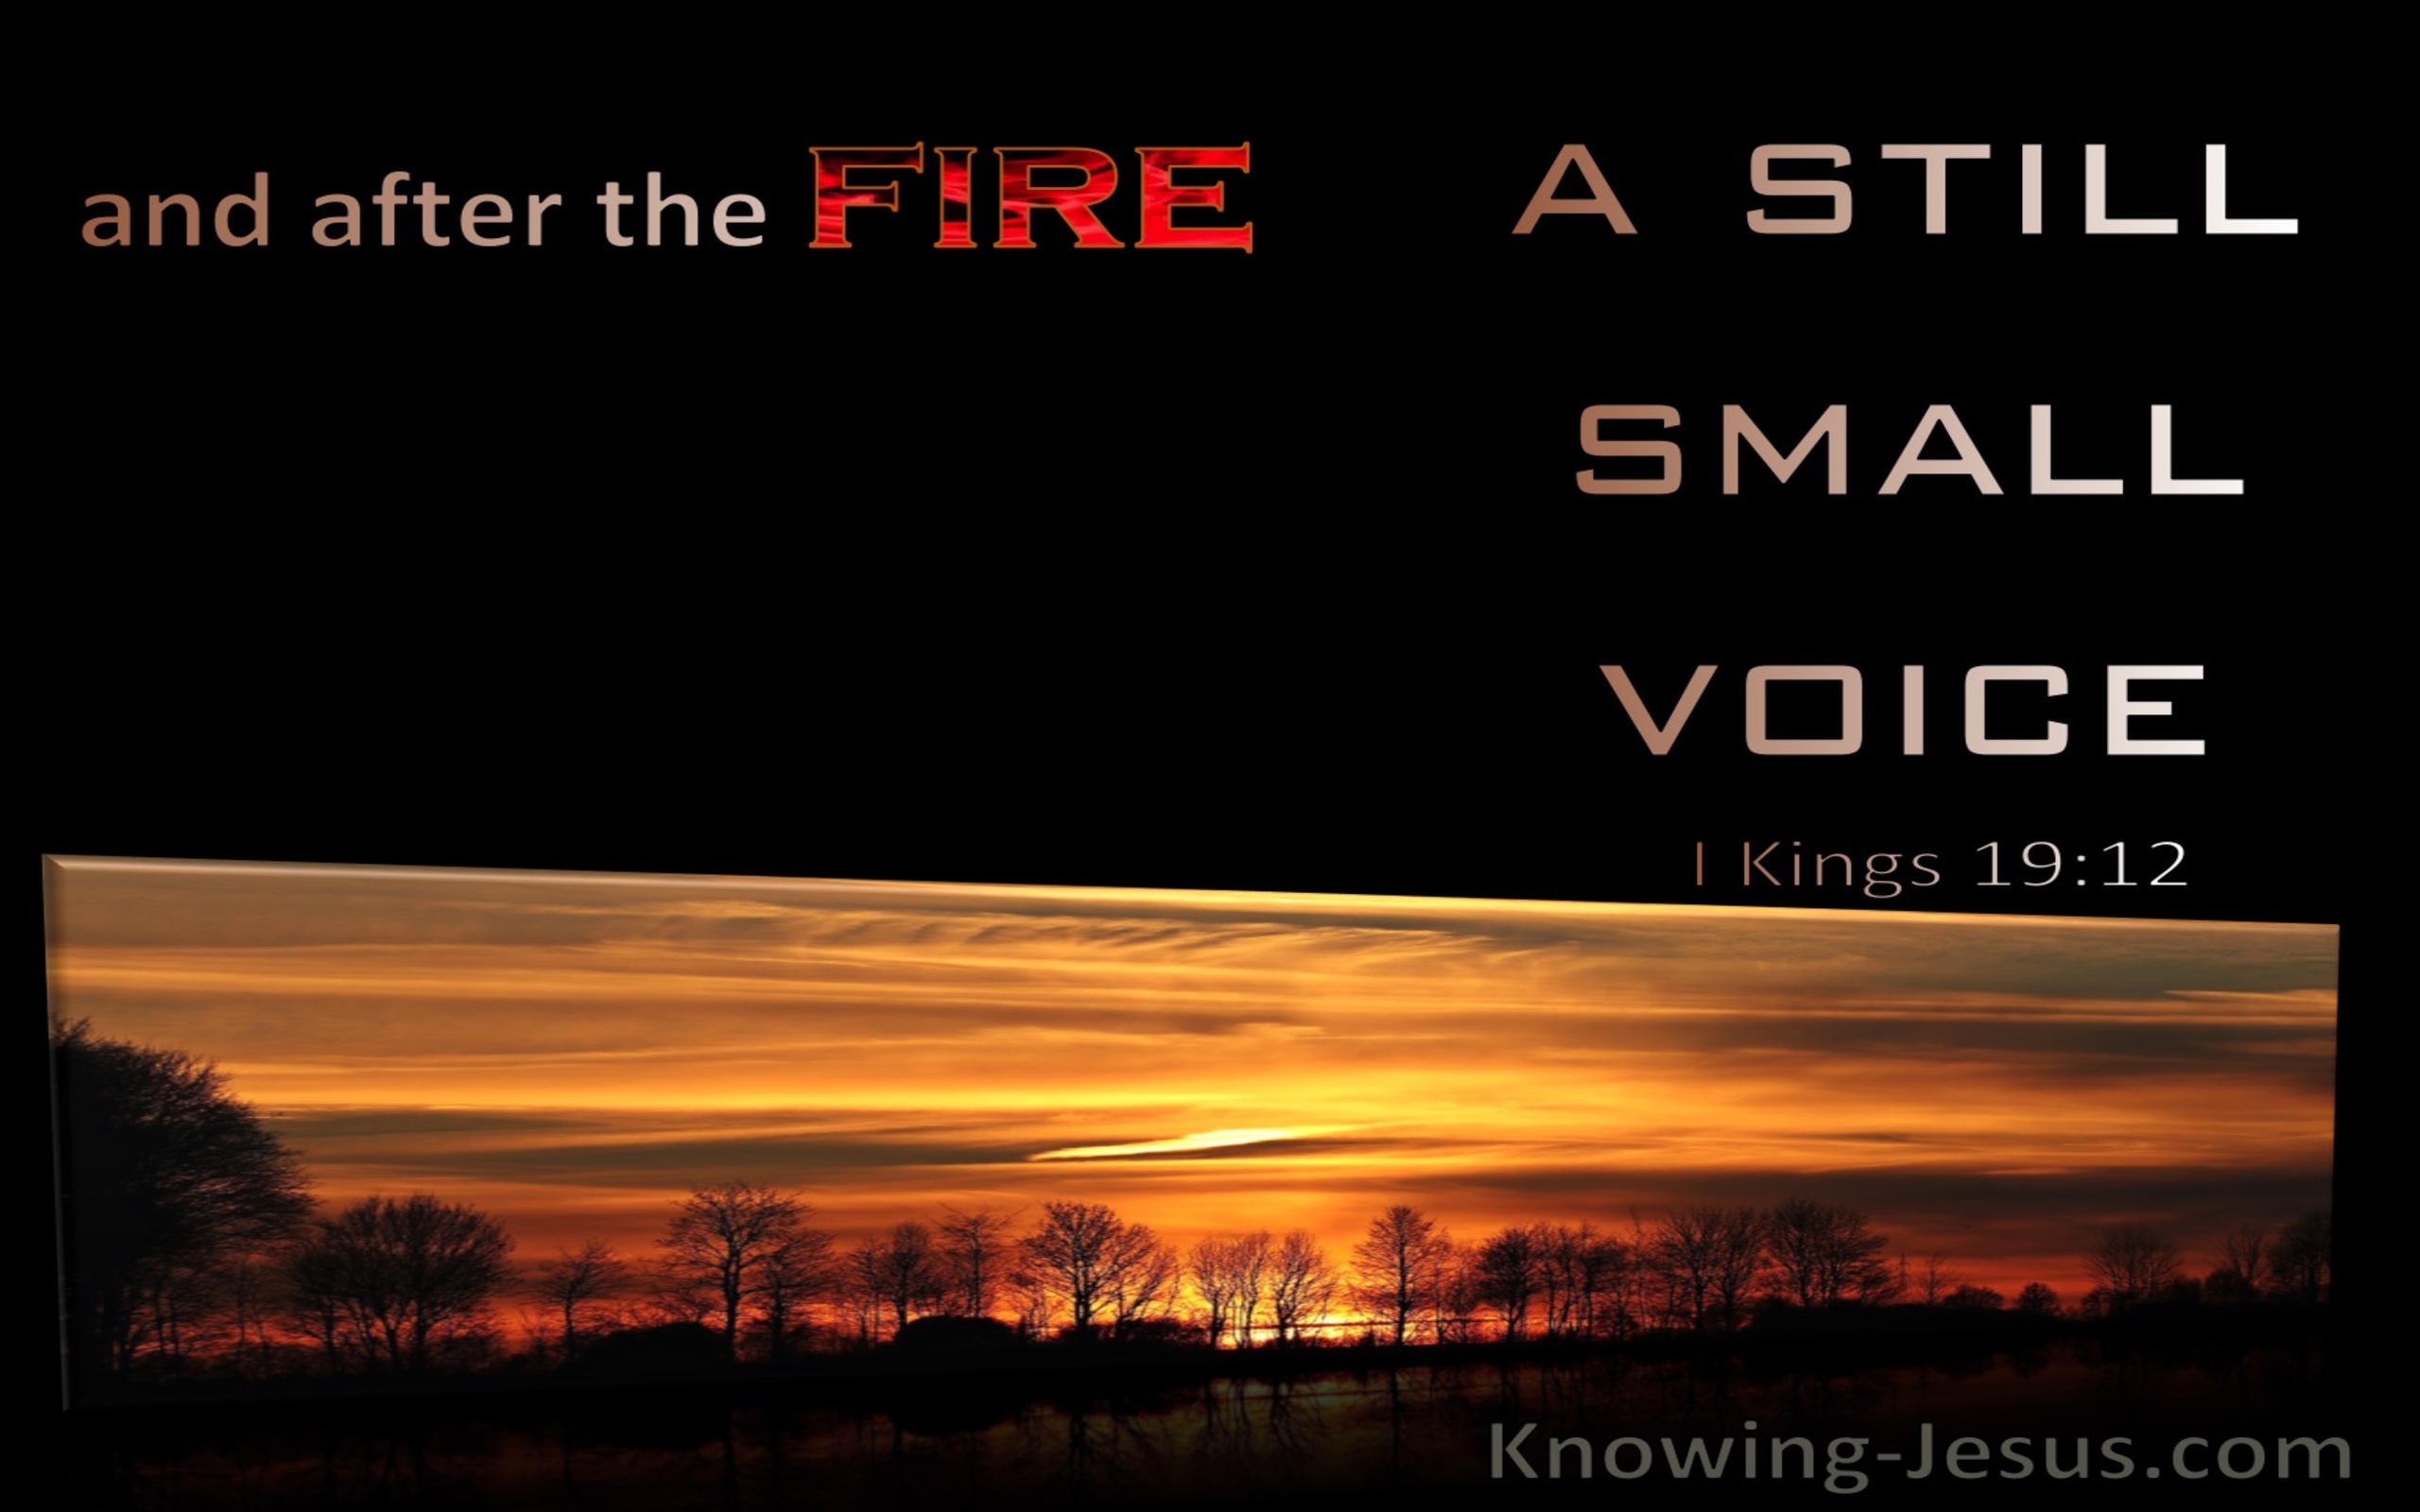 1 Kings 19:12 After The Fire A Still Small Voice (orange)